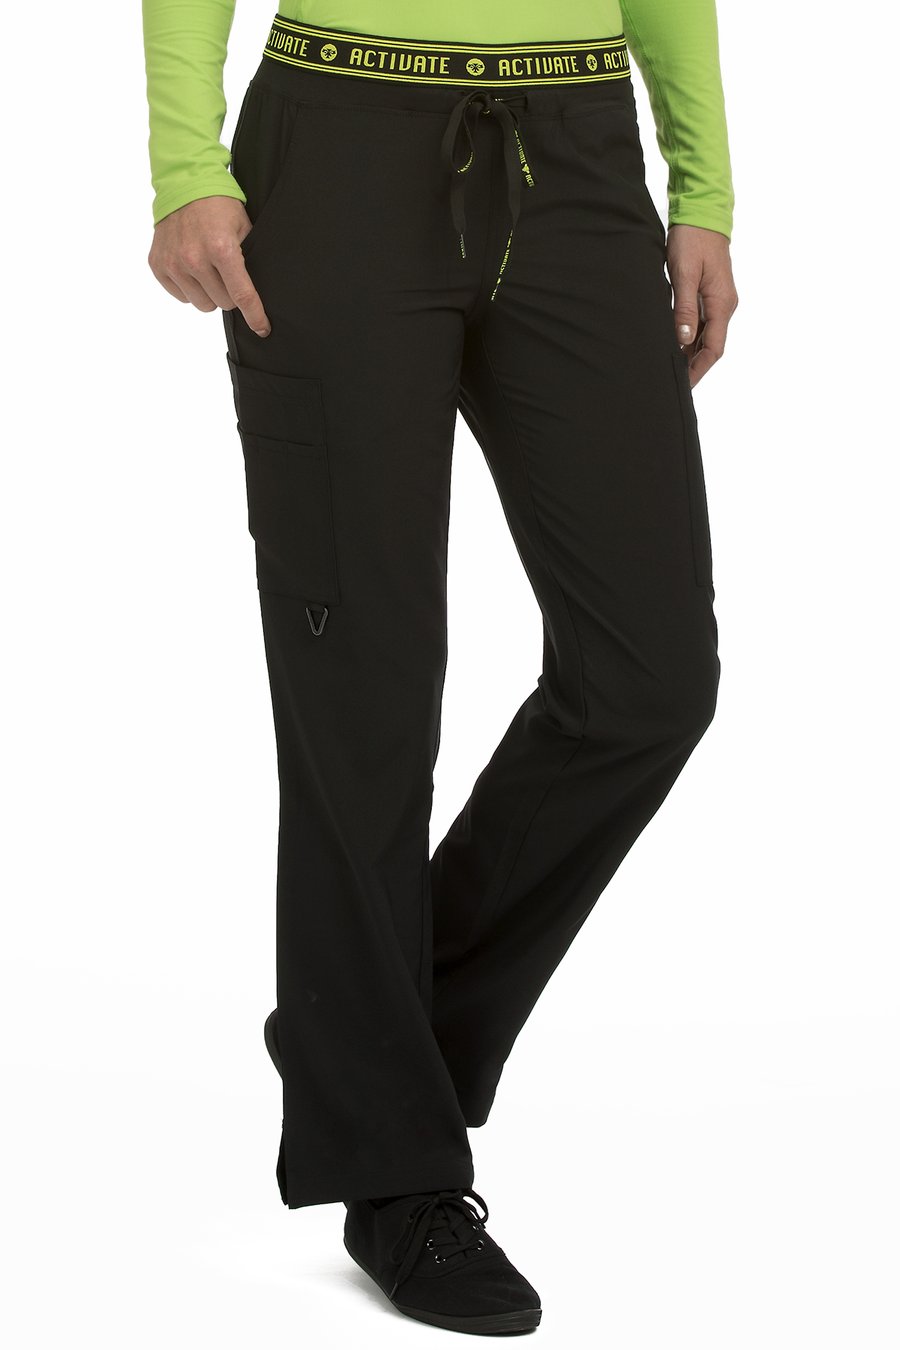 Yoga 2 Cargo Pocket Pant by Med Couture (Petite) XS-XL / Black